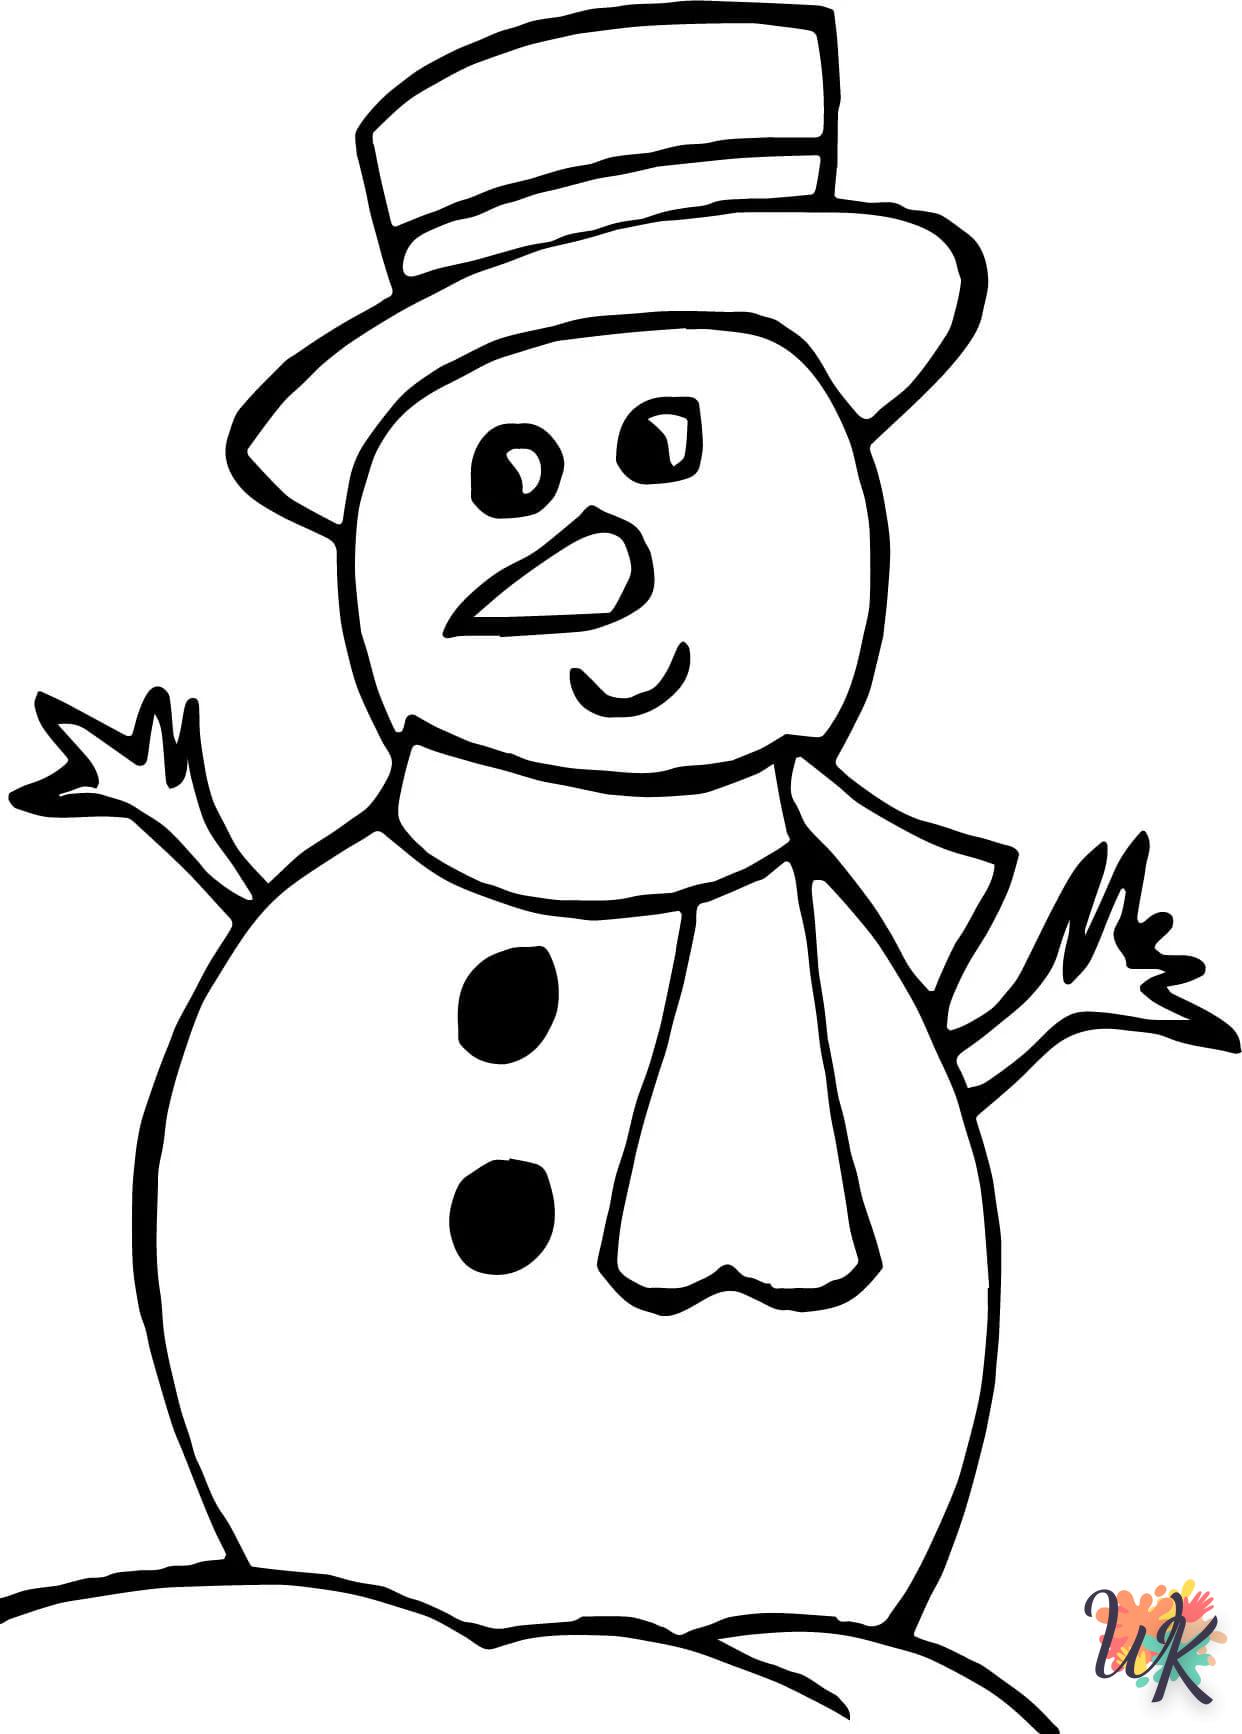 Snowman coloring online 8 years old